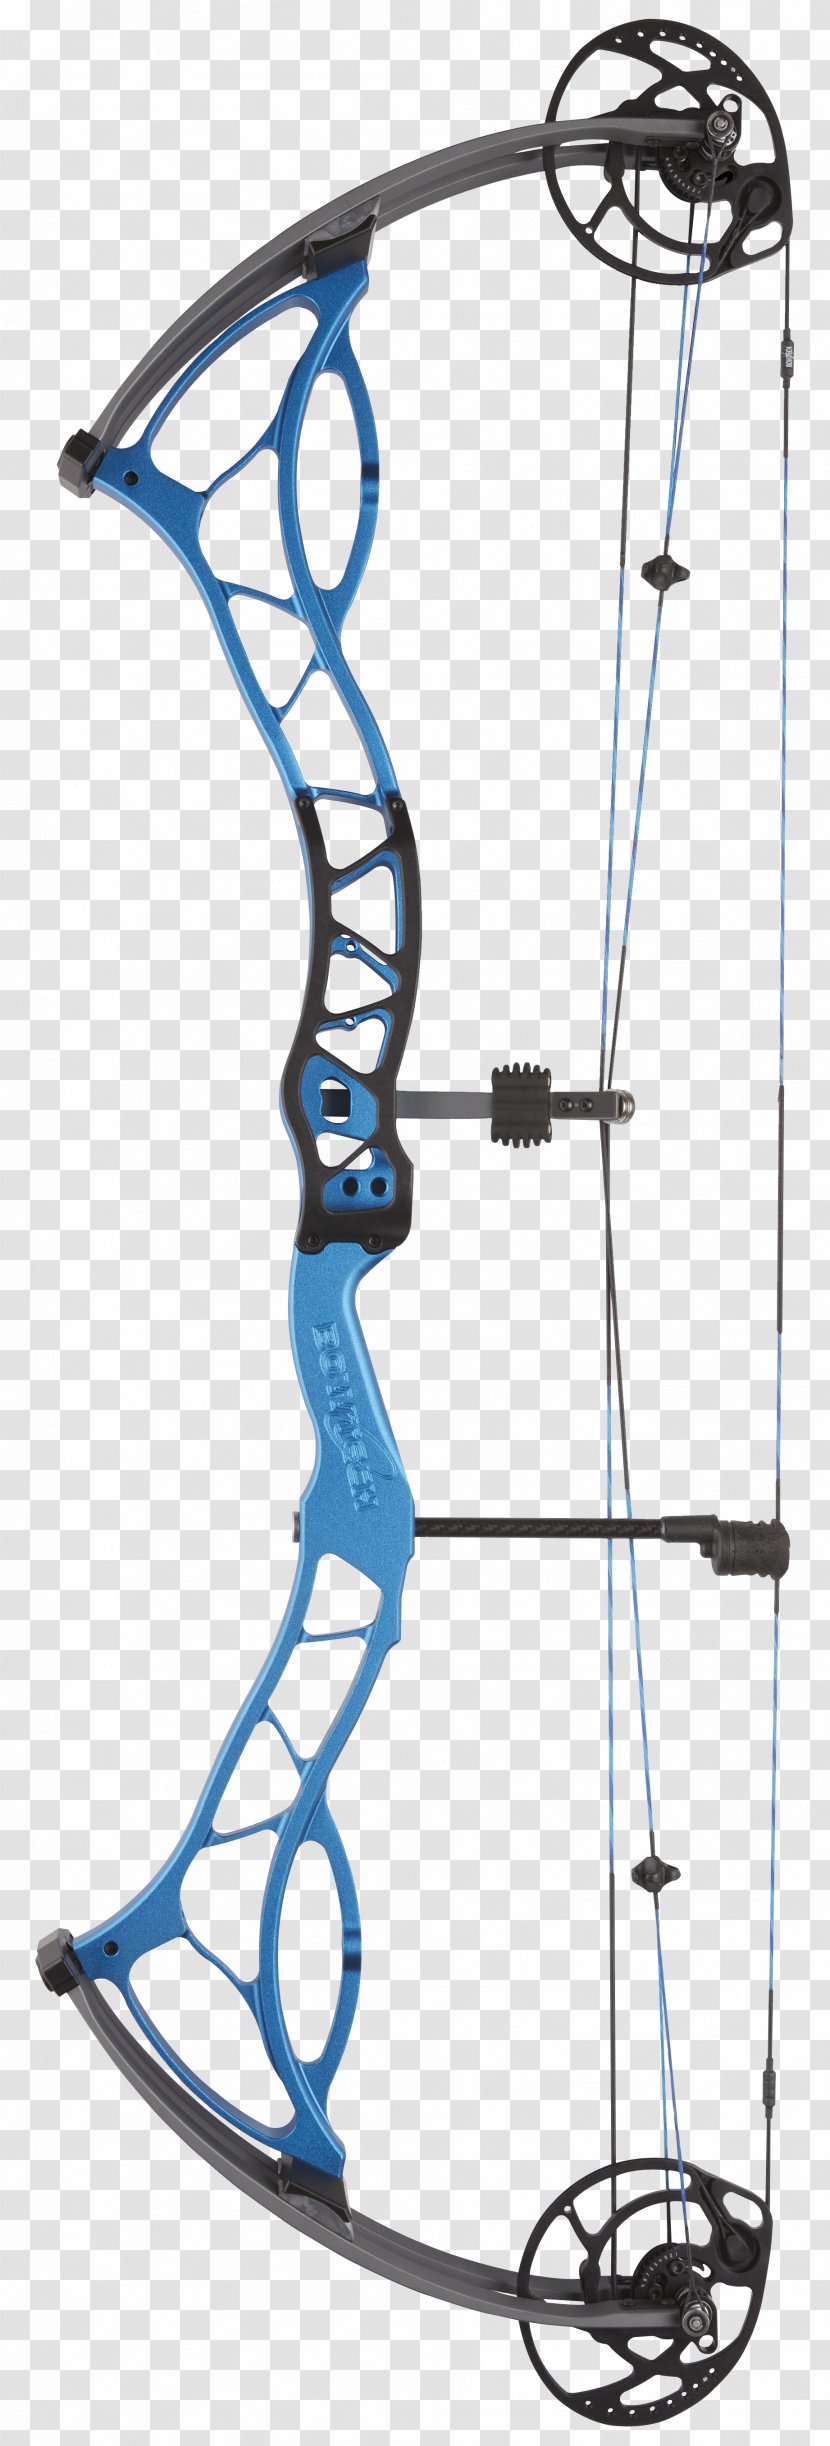 BowTech Archery Compound Bows Bow And Arrow Crossbow - Shooting Transparent PNG